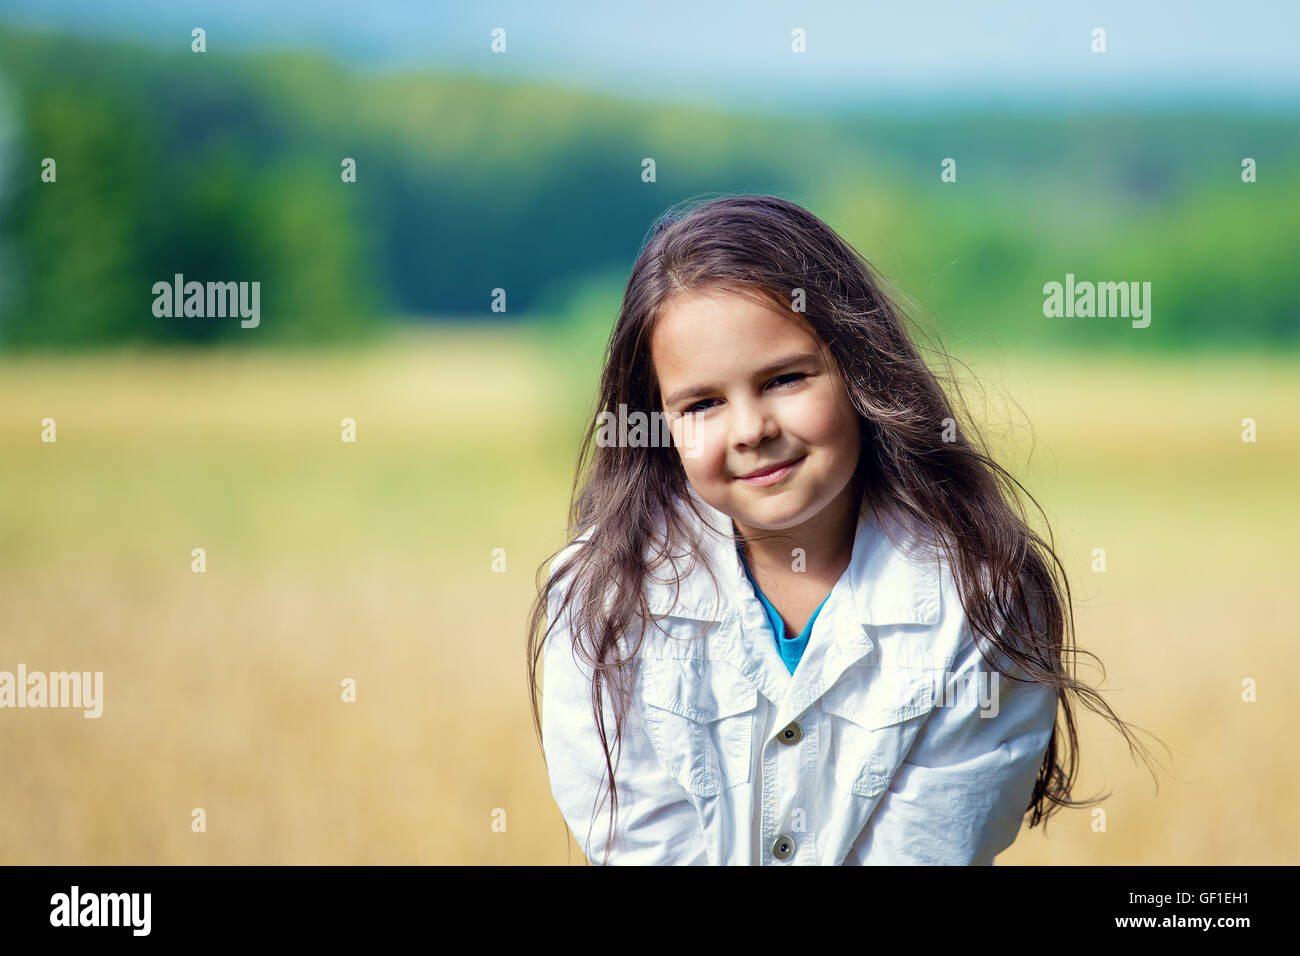 Portrait of cute little girl with brown long hair in wheat field Stock Photo